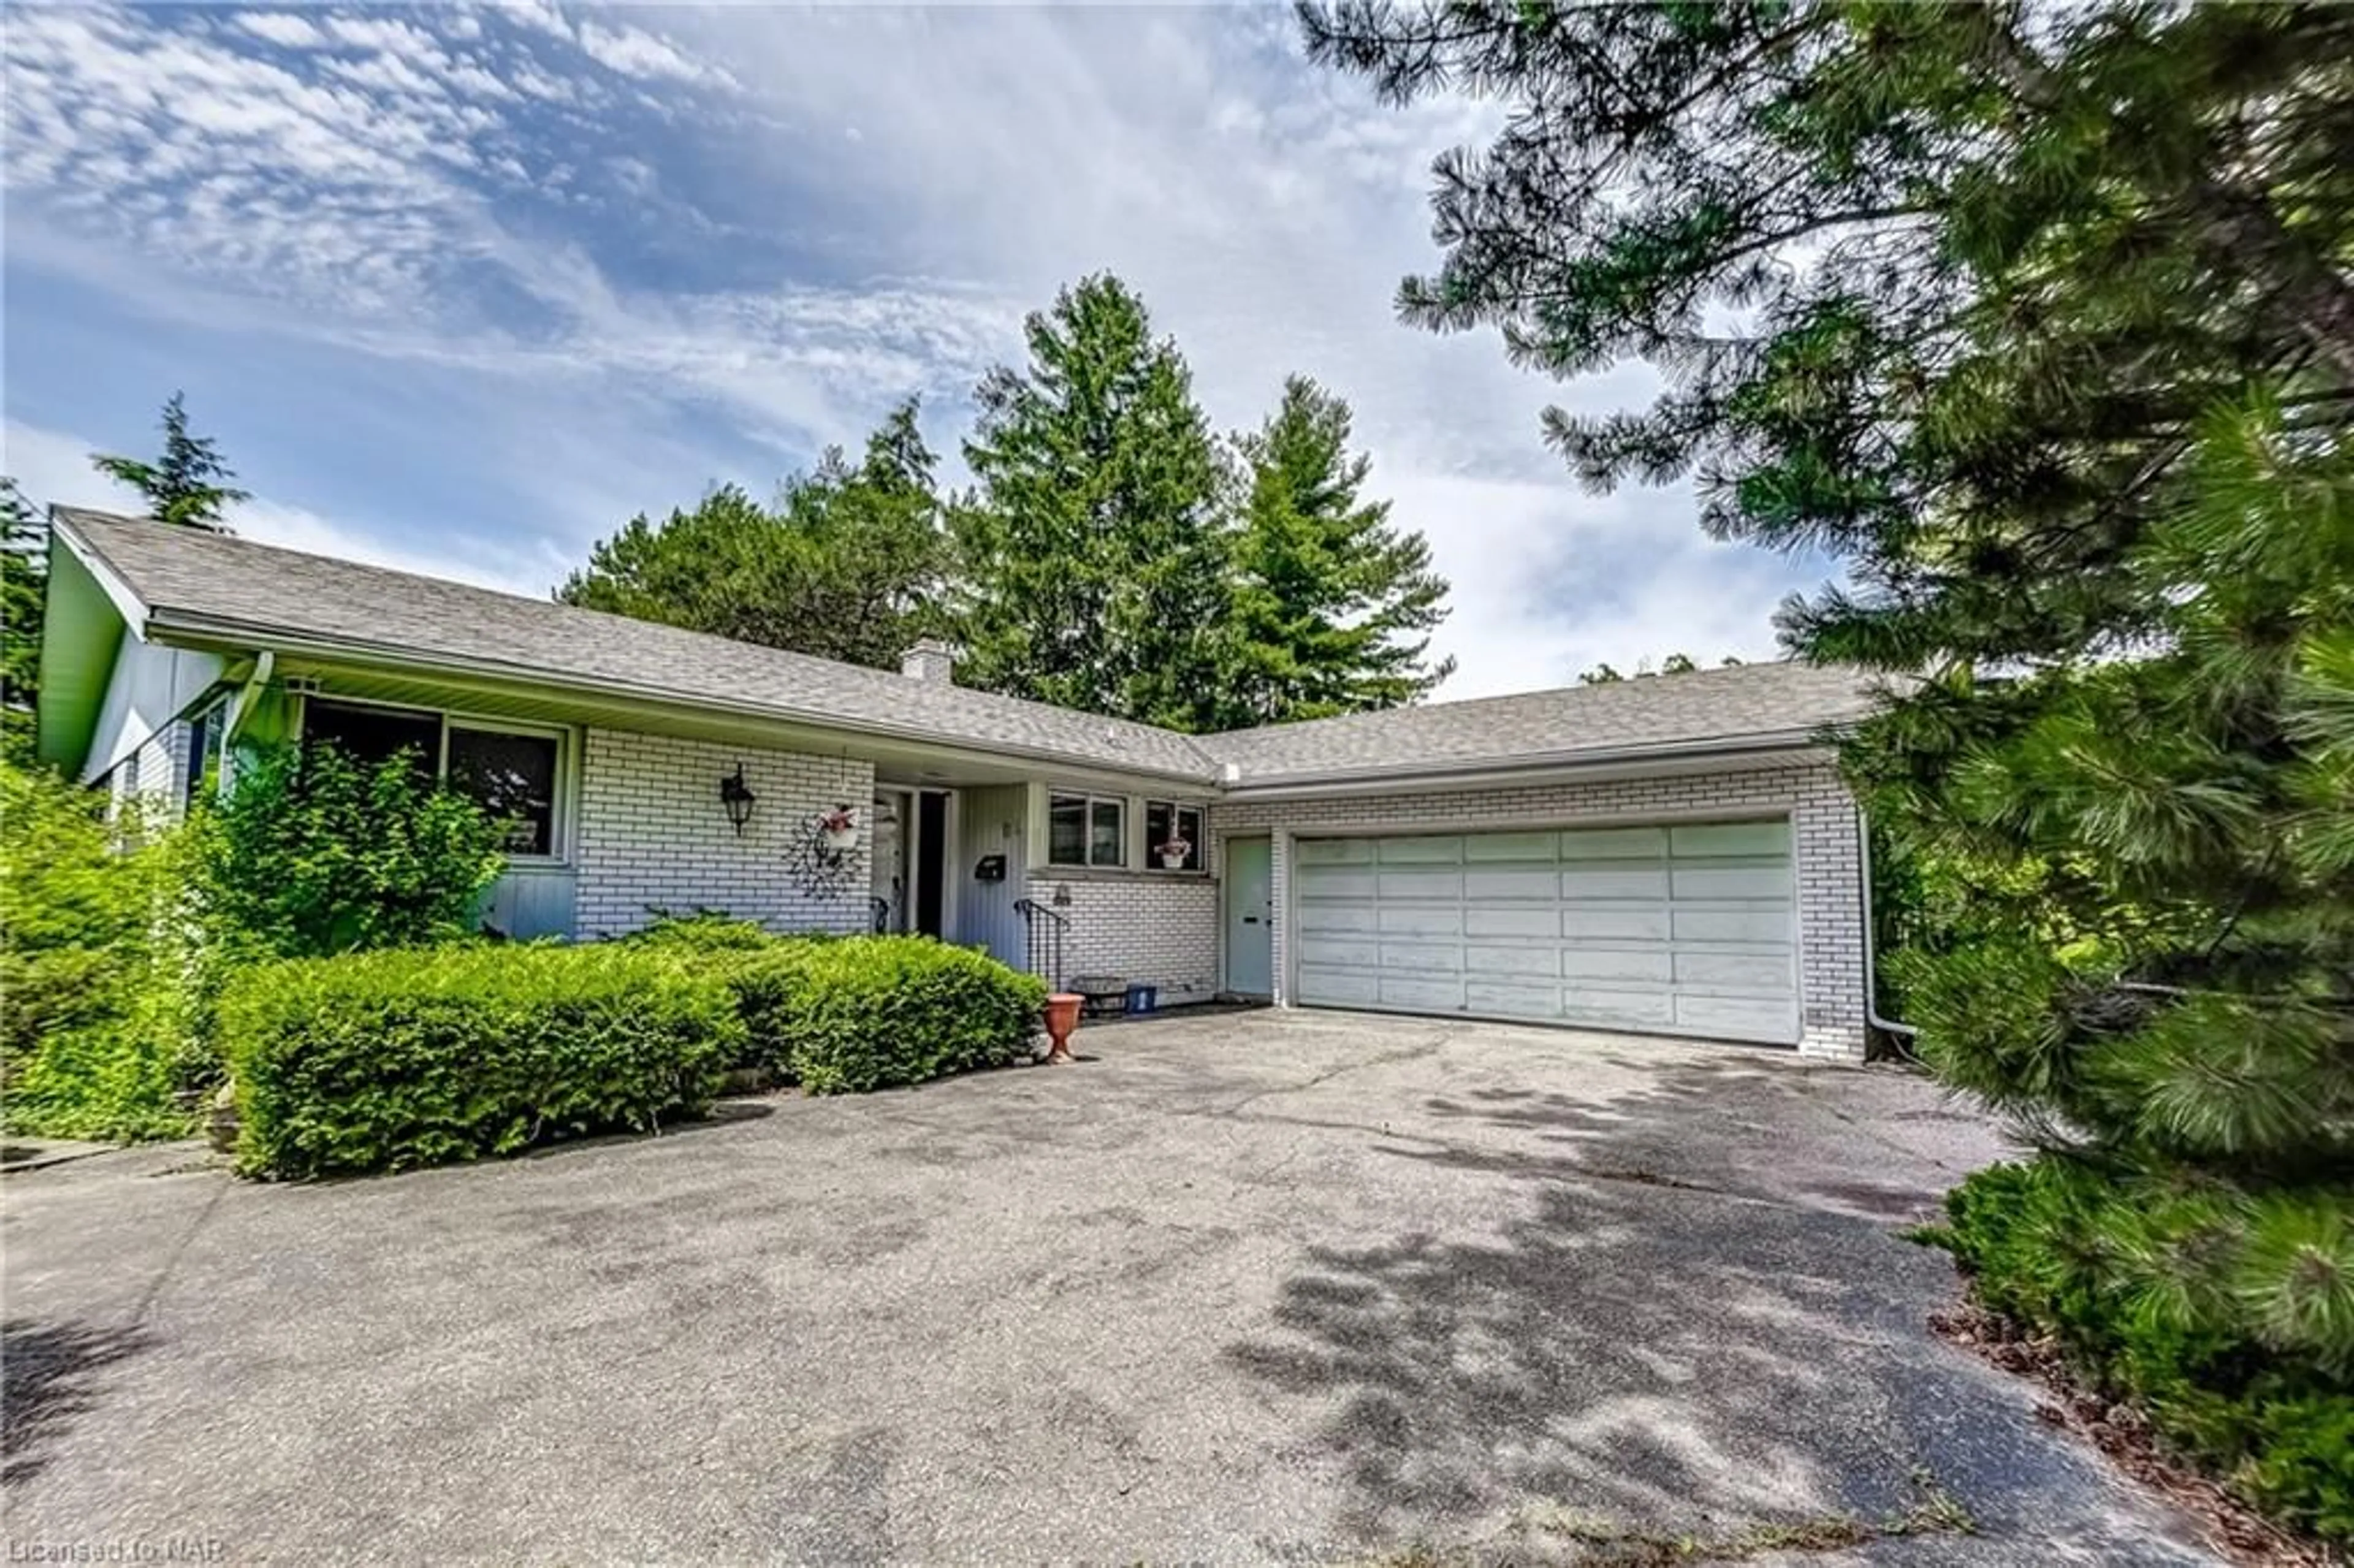 Frontside or backside of a home for 27 Cartier Dr, St. Catharines Ontario L2M 2E5